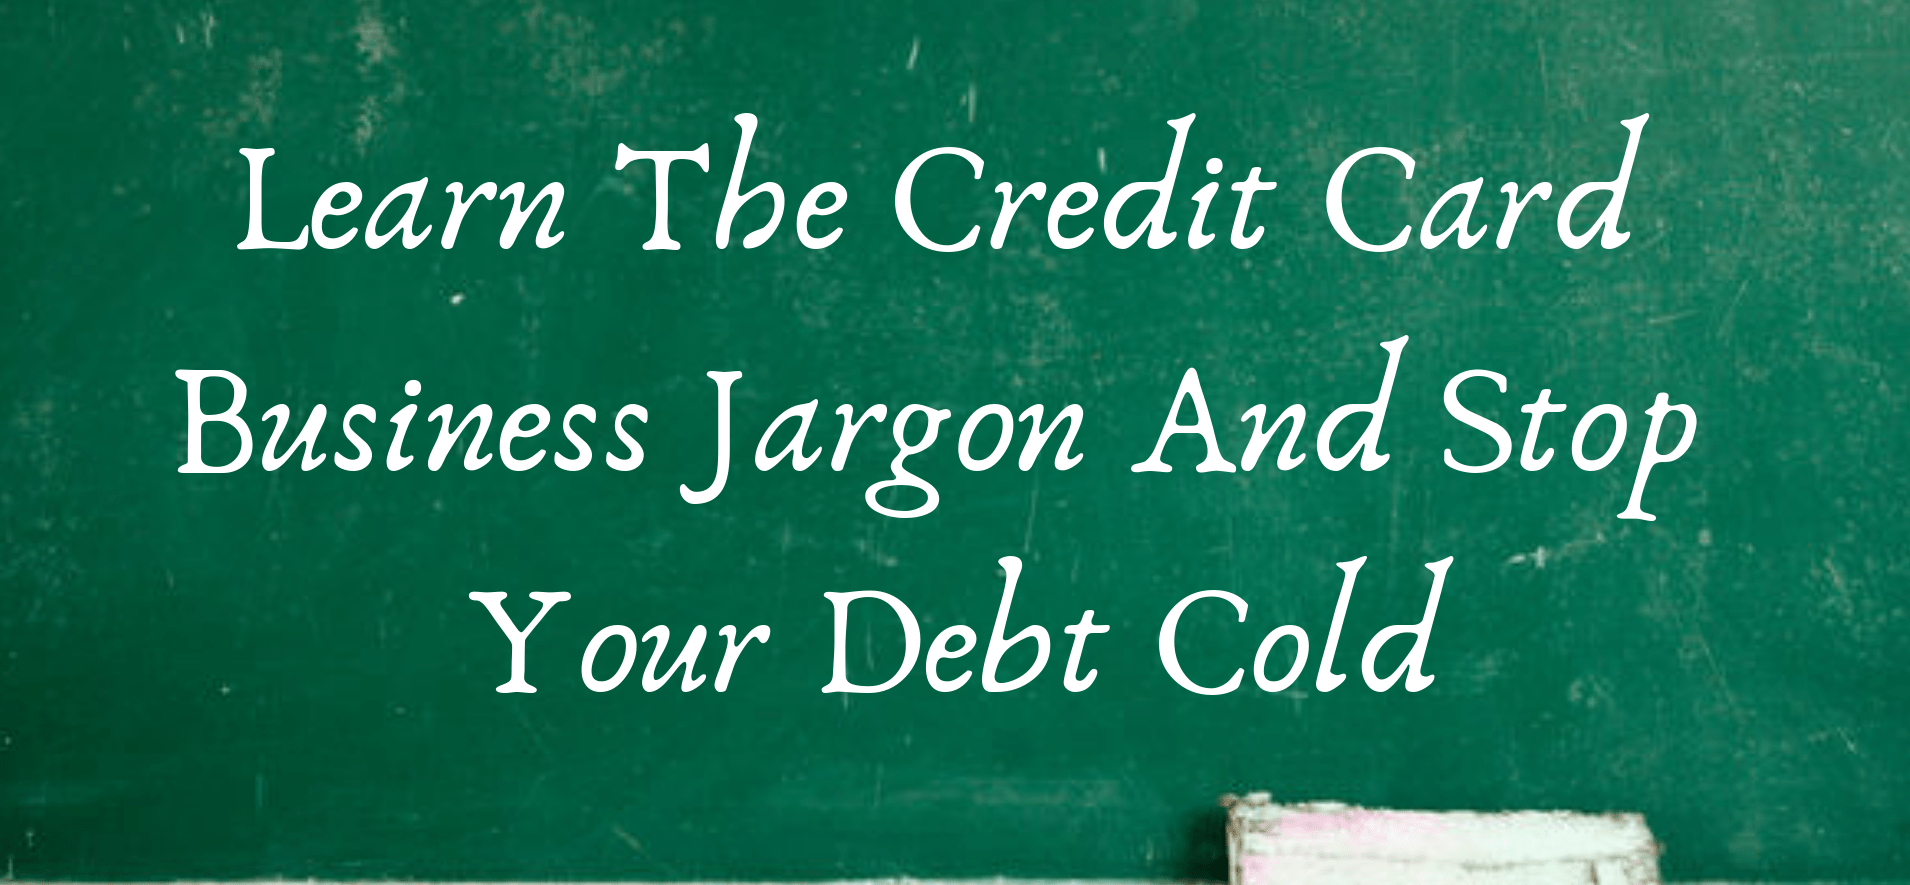 Learn The Credit Card Business Jargon And Stop Your Debt Cold